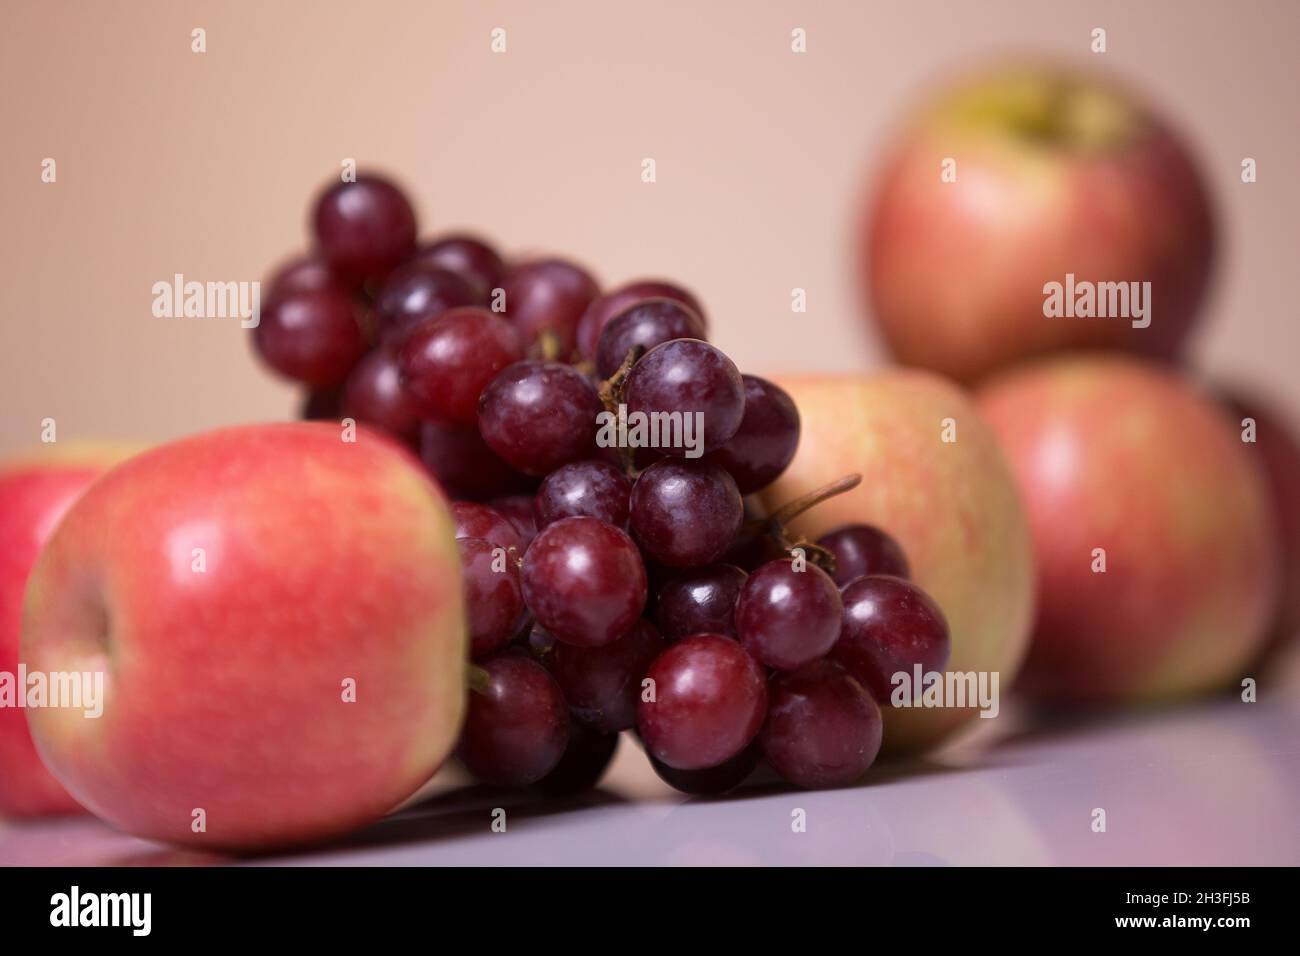 Fruits- The green grapes, red grapes, green apples and red apples Stock Photo